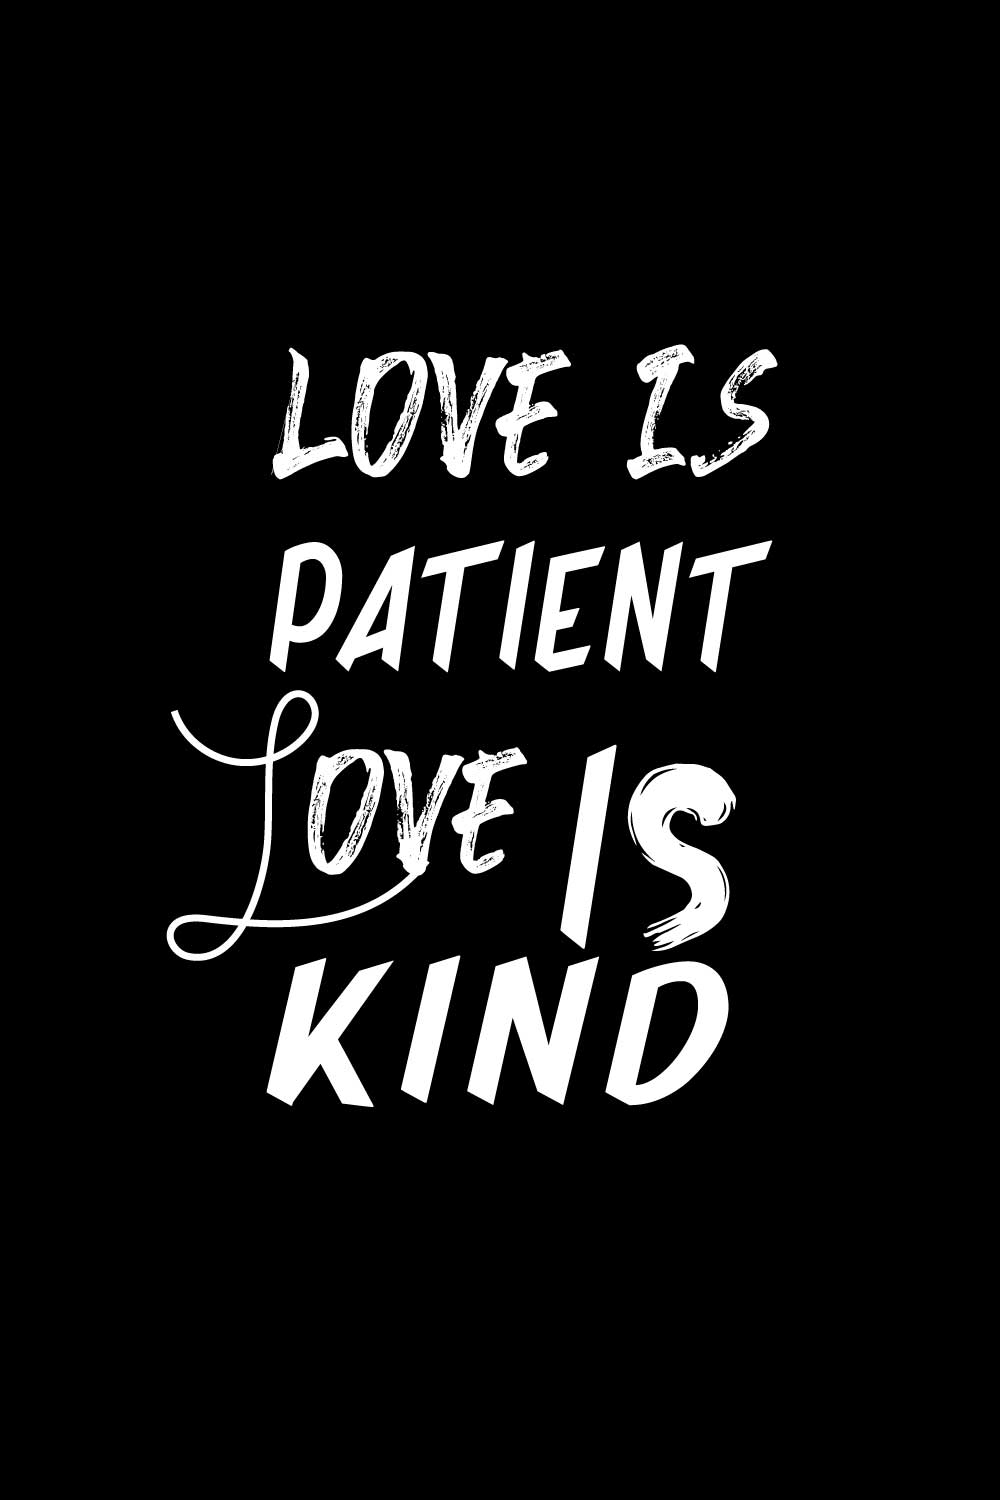 love is paitent love is kind pinterest preview image.